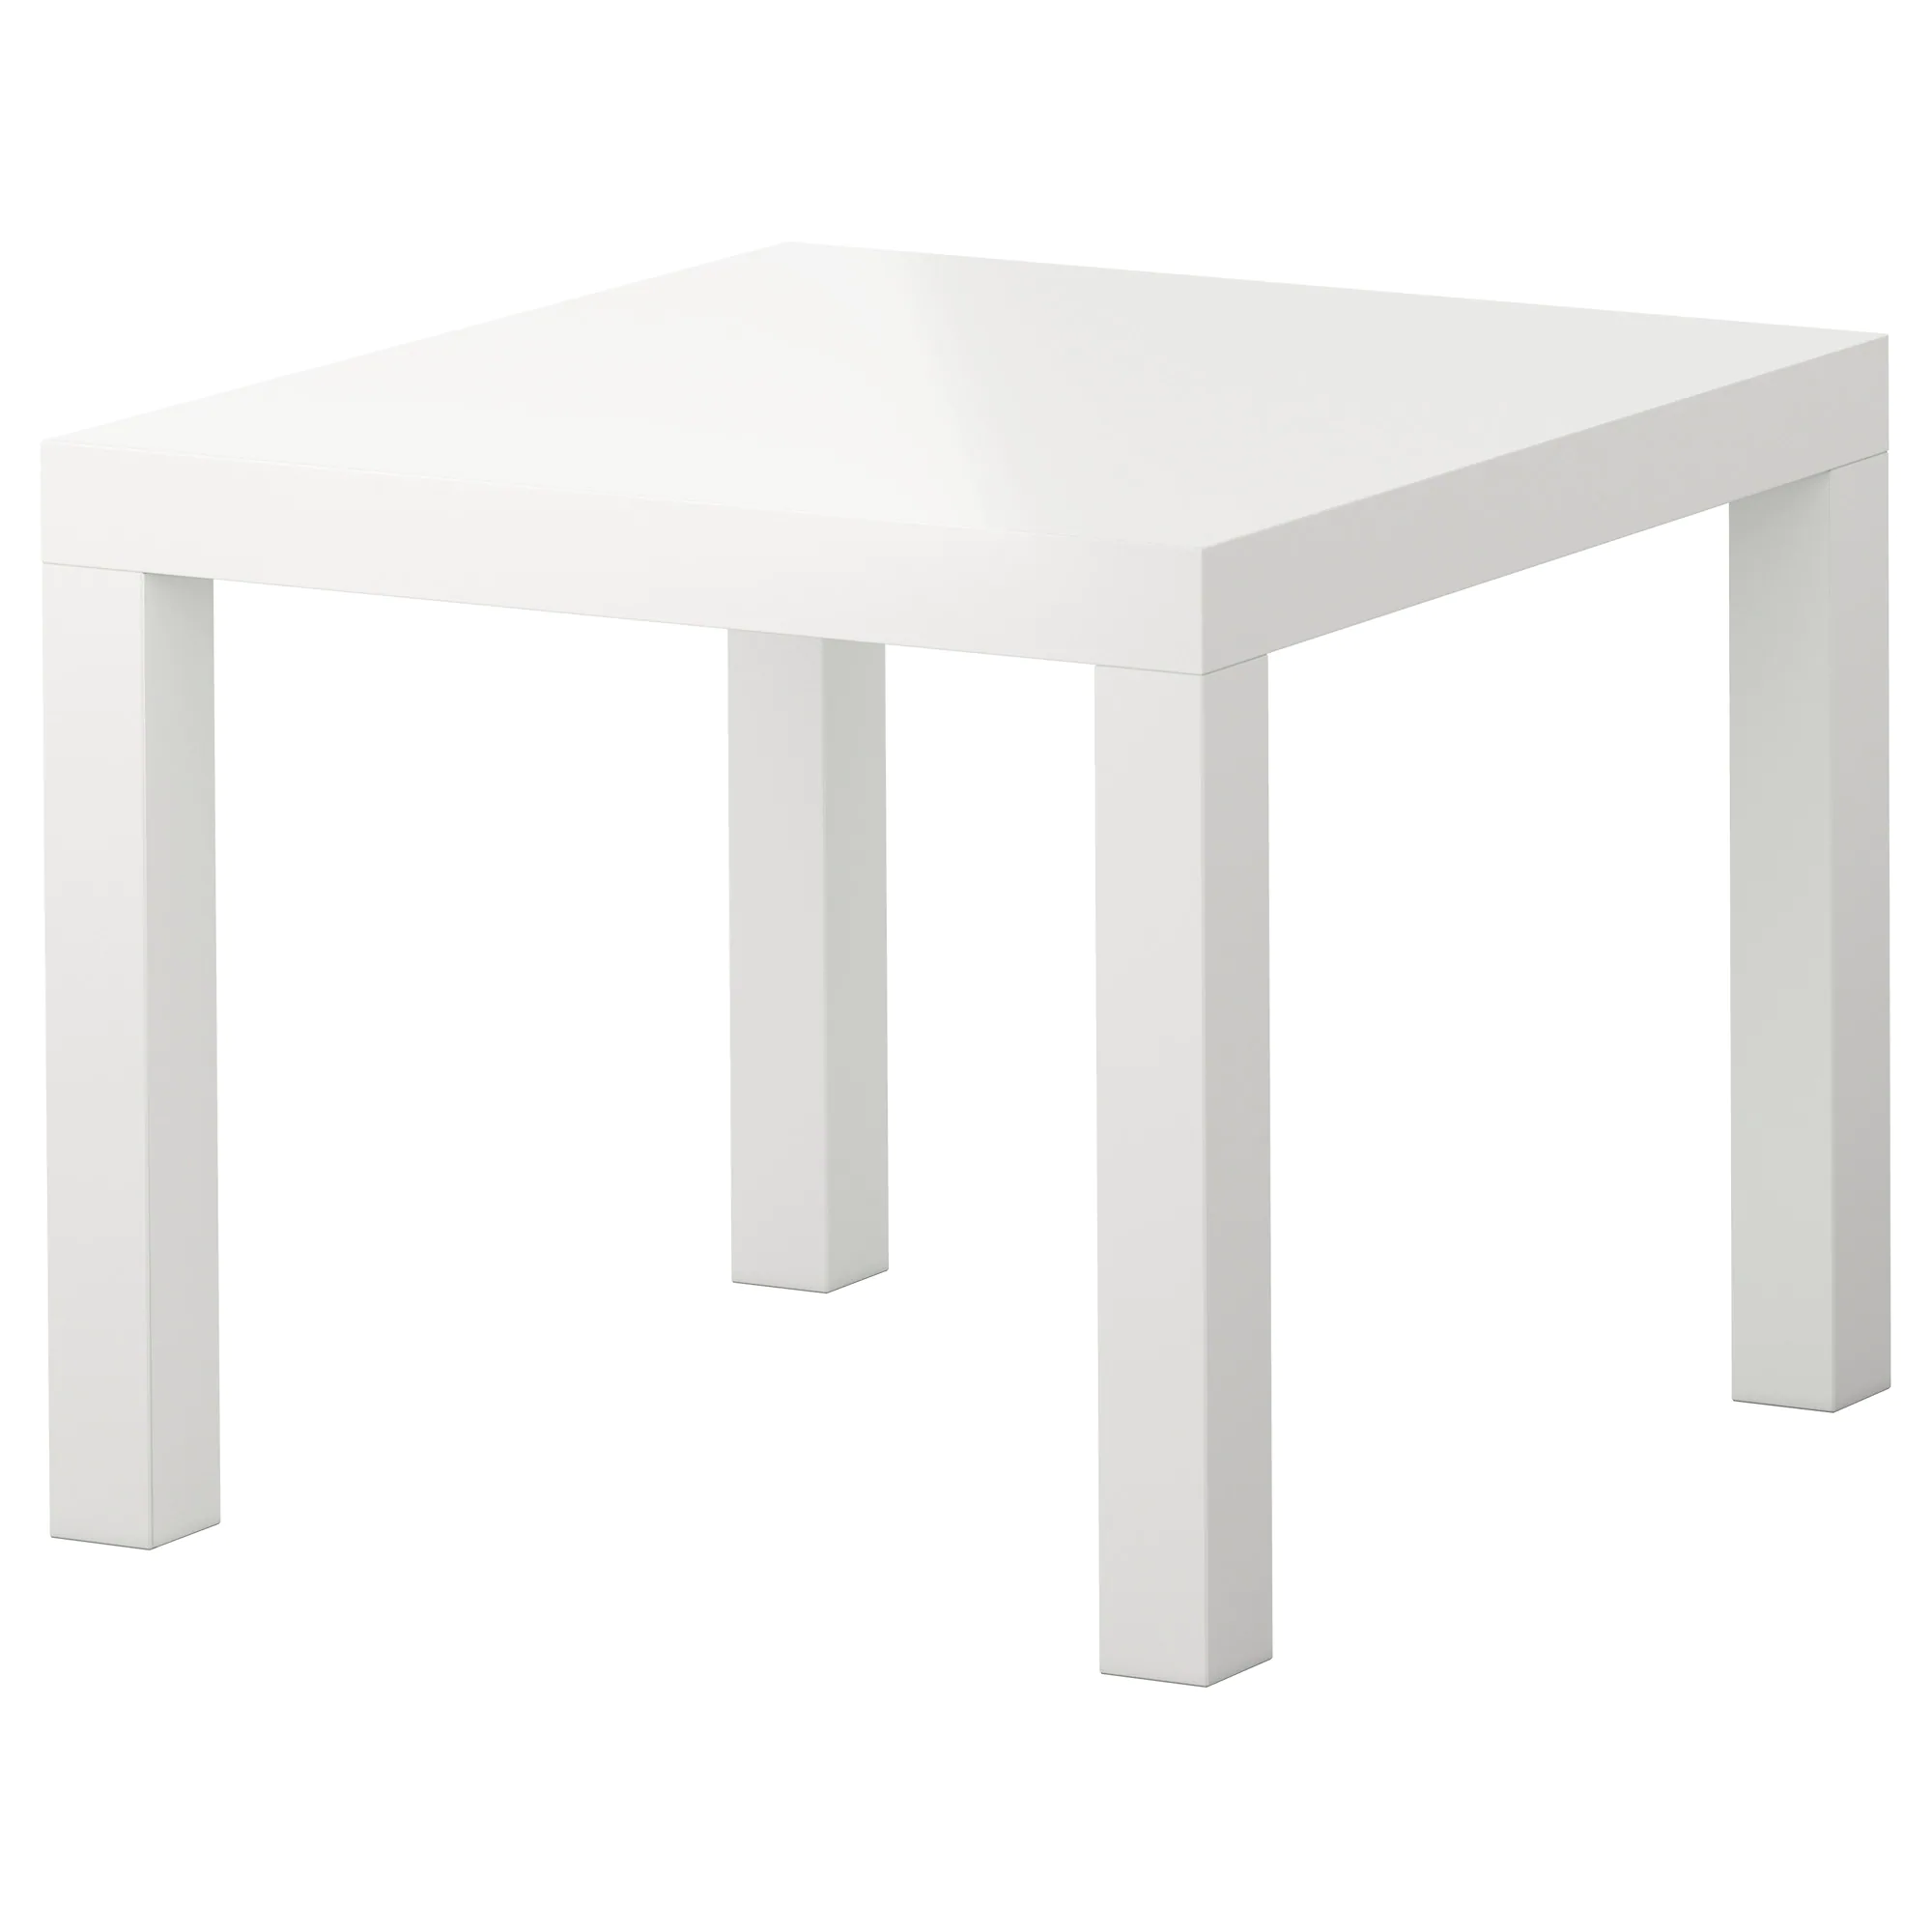 lack side table high gloss white ikea small end tables and coffee the surfaces reflect light give vibrant look george nelson metal outdoor rectangular glass top garden furniture